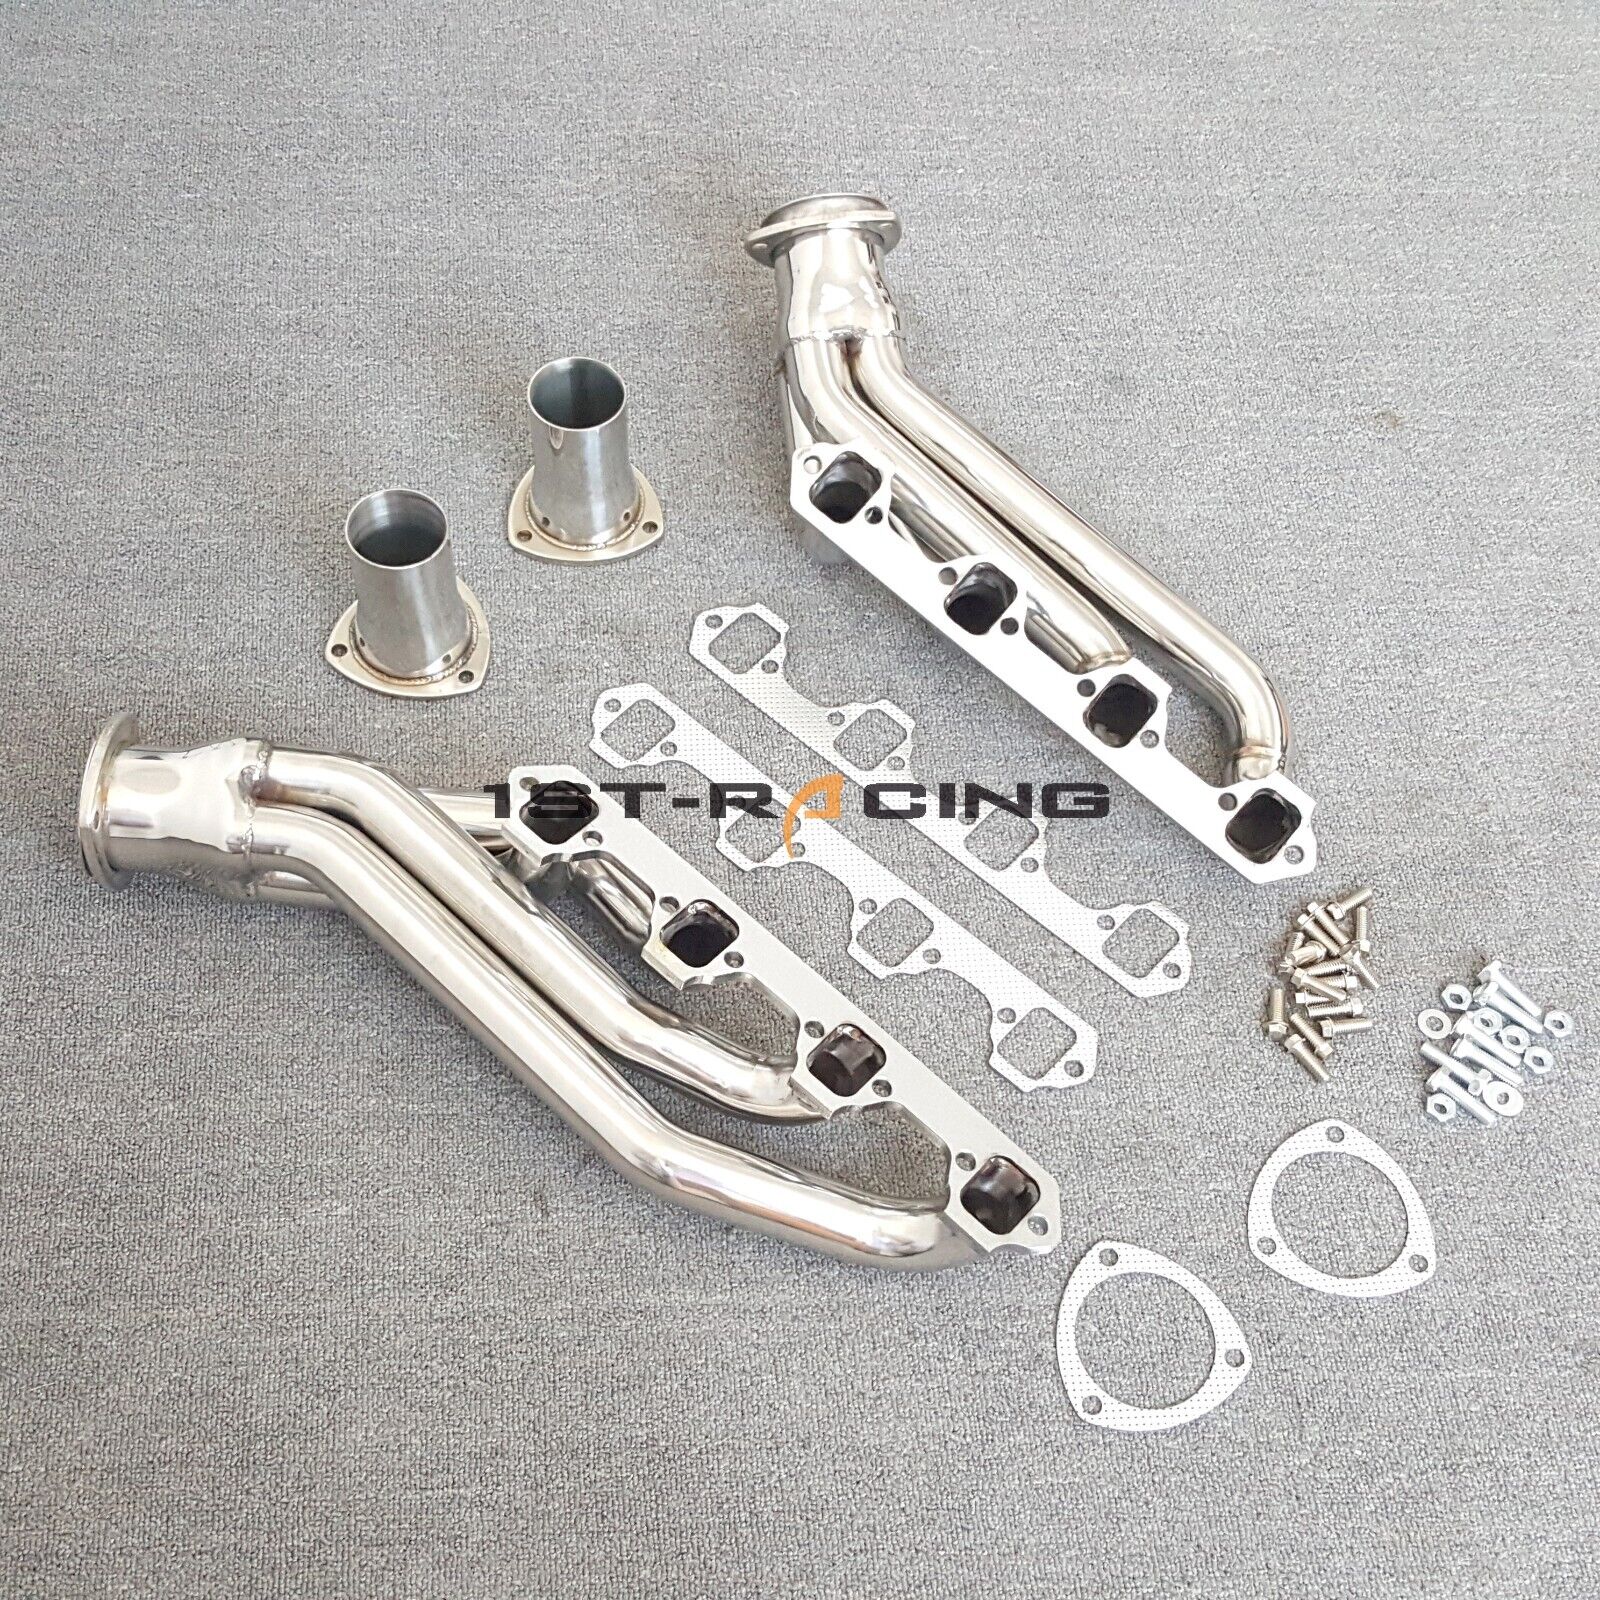 Exhaust Headers For 64-73 Ford Mustang Maverick  Falcon Small Block 289 302 SBF